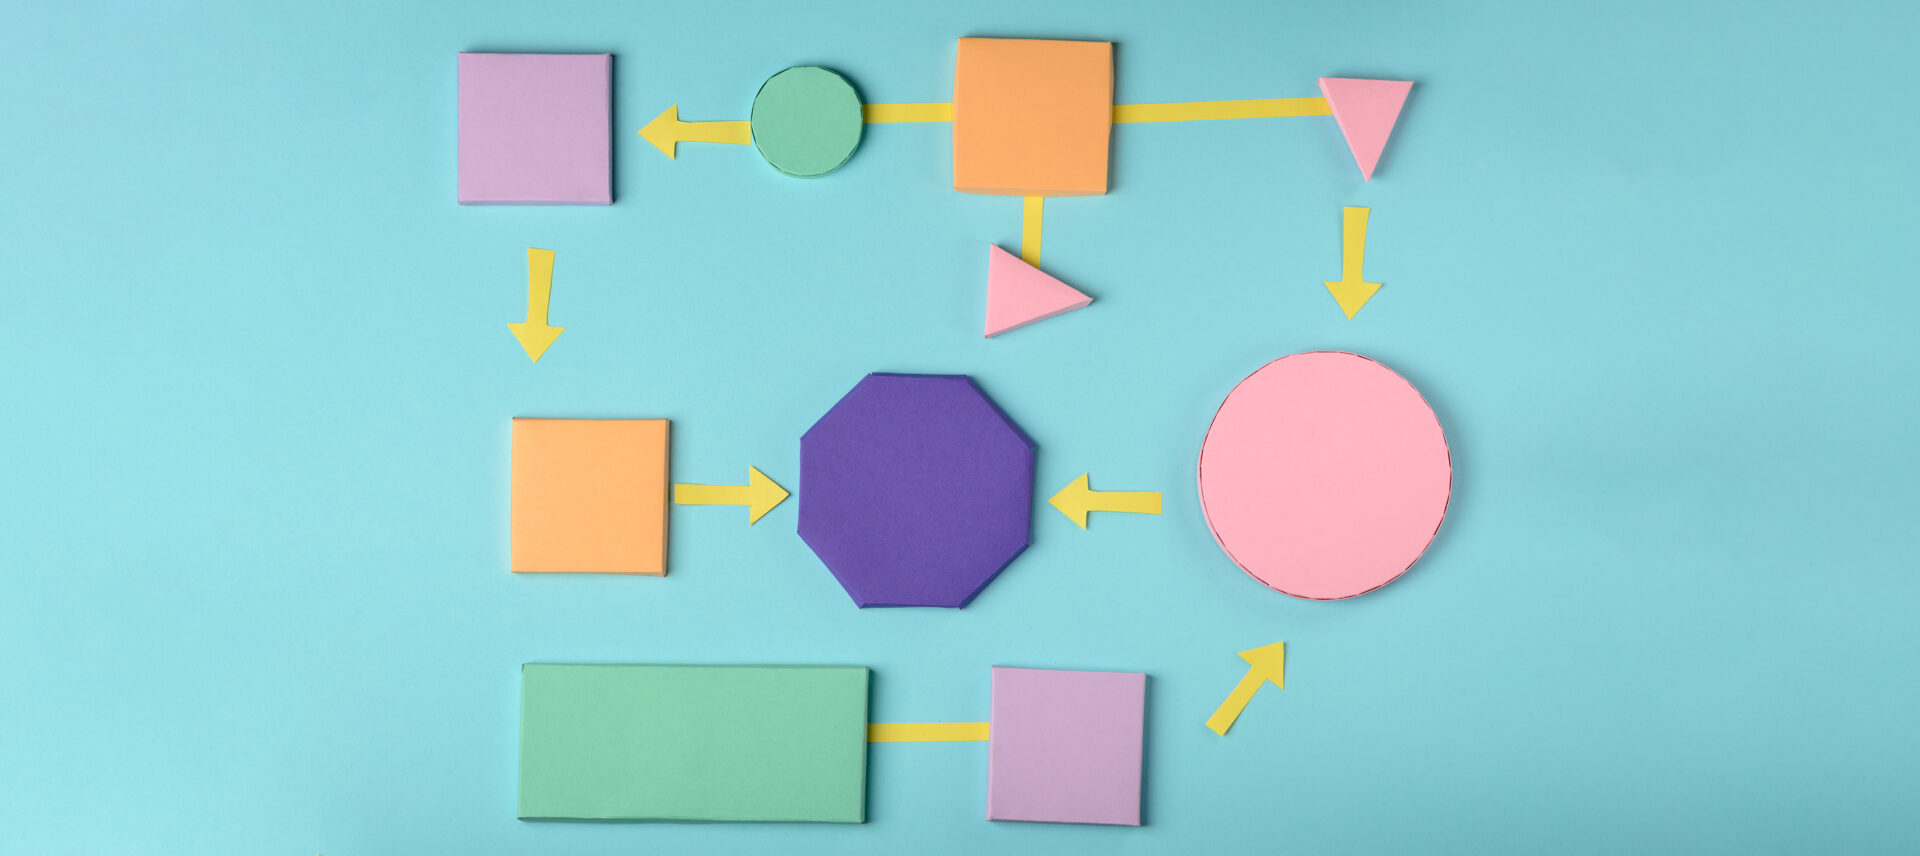 colored shapes in a flowchart pattern